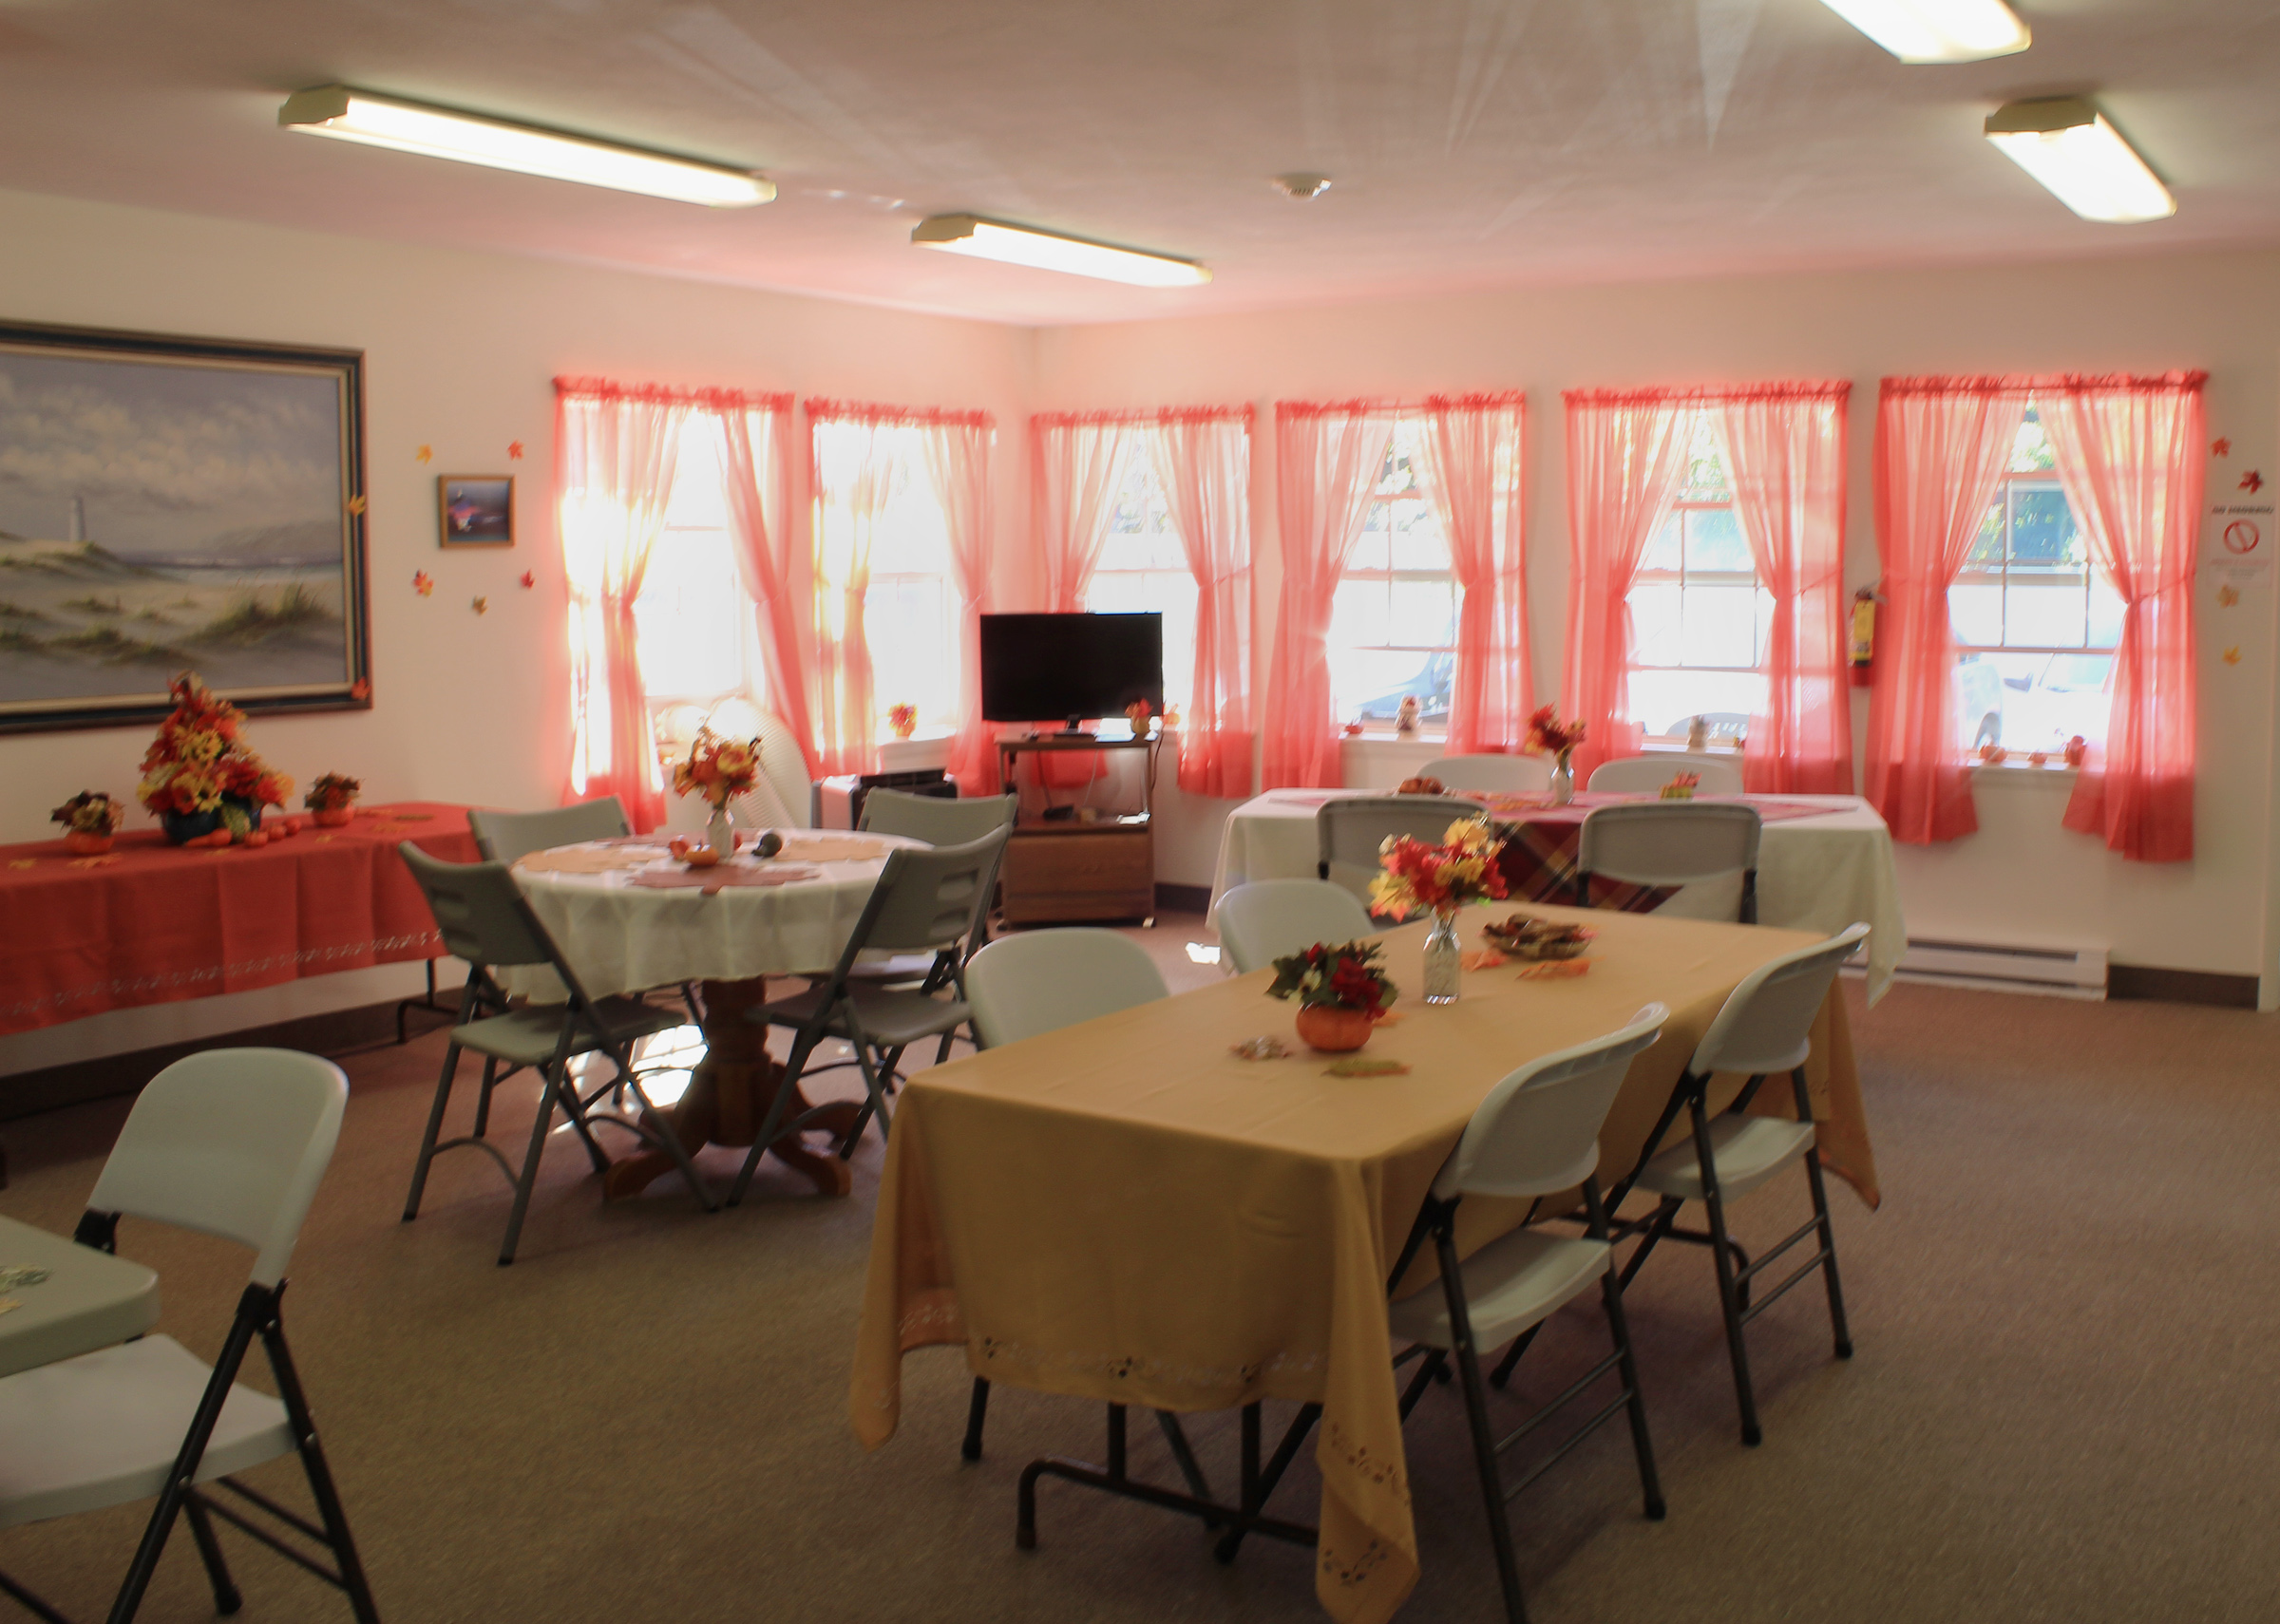 property management company client list syracuse ny dining room image of fair haven senior apartments